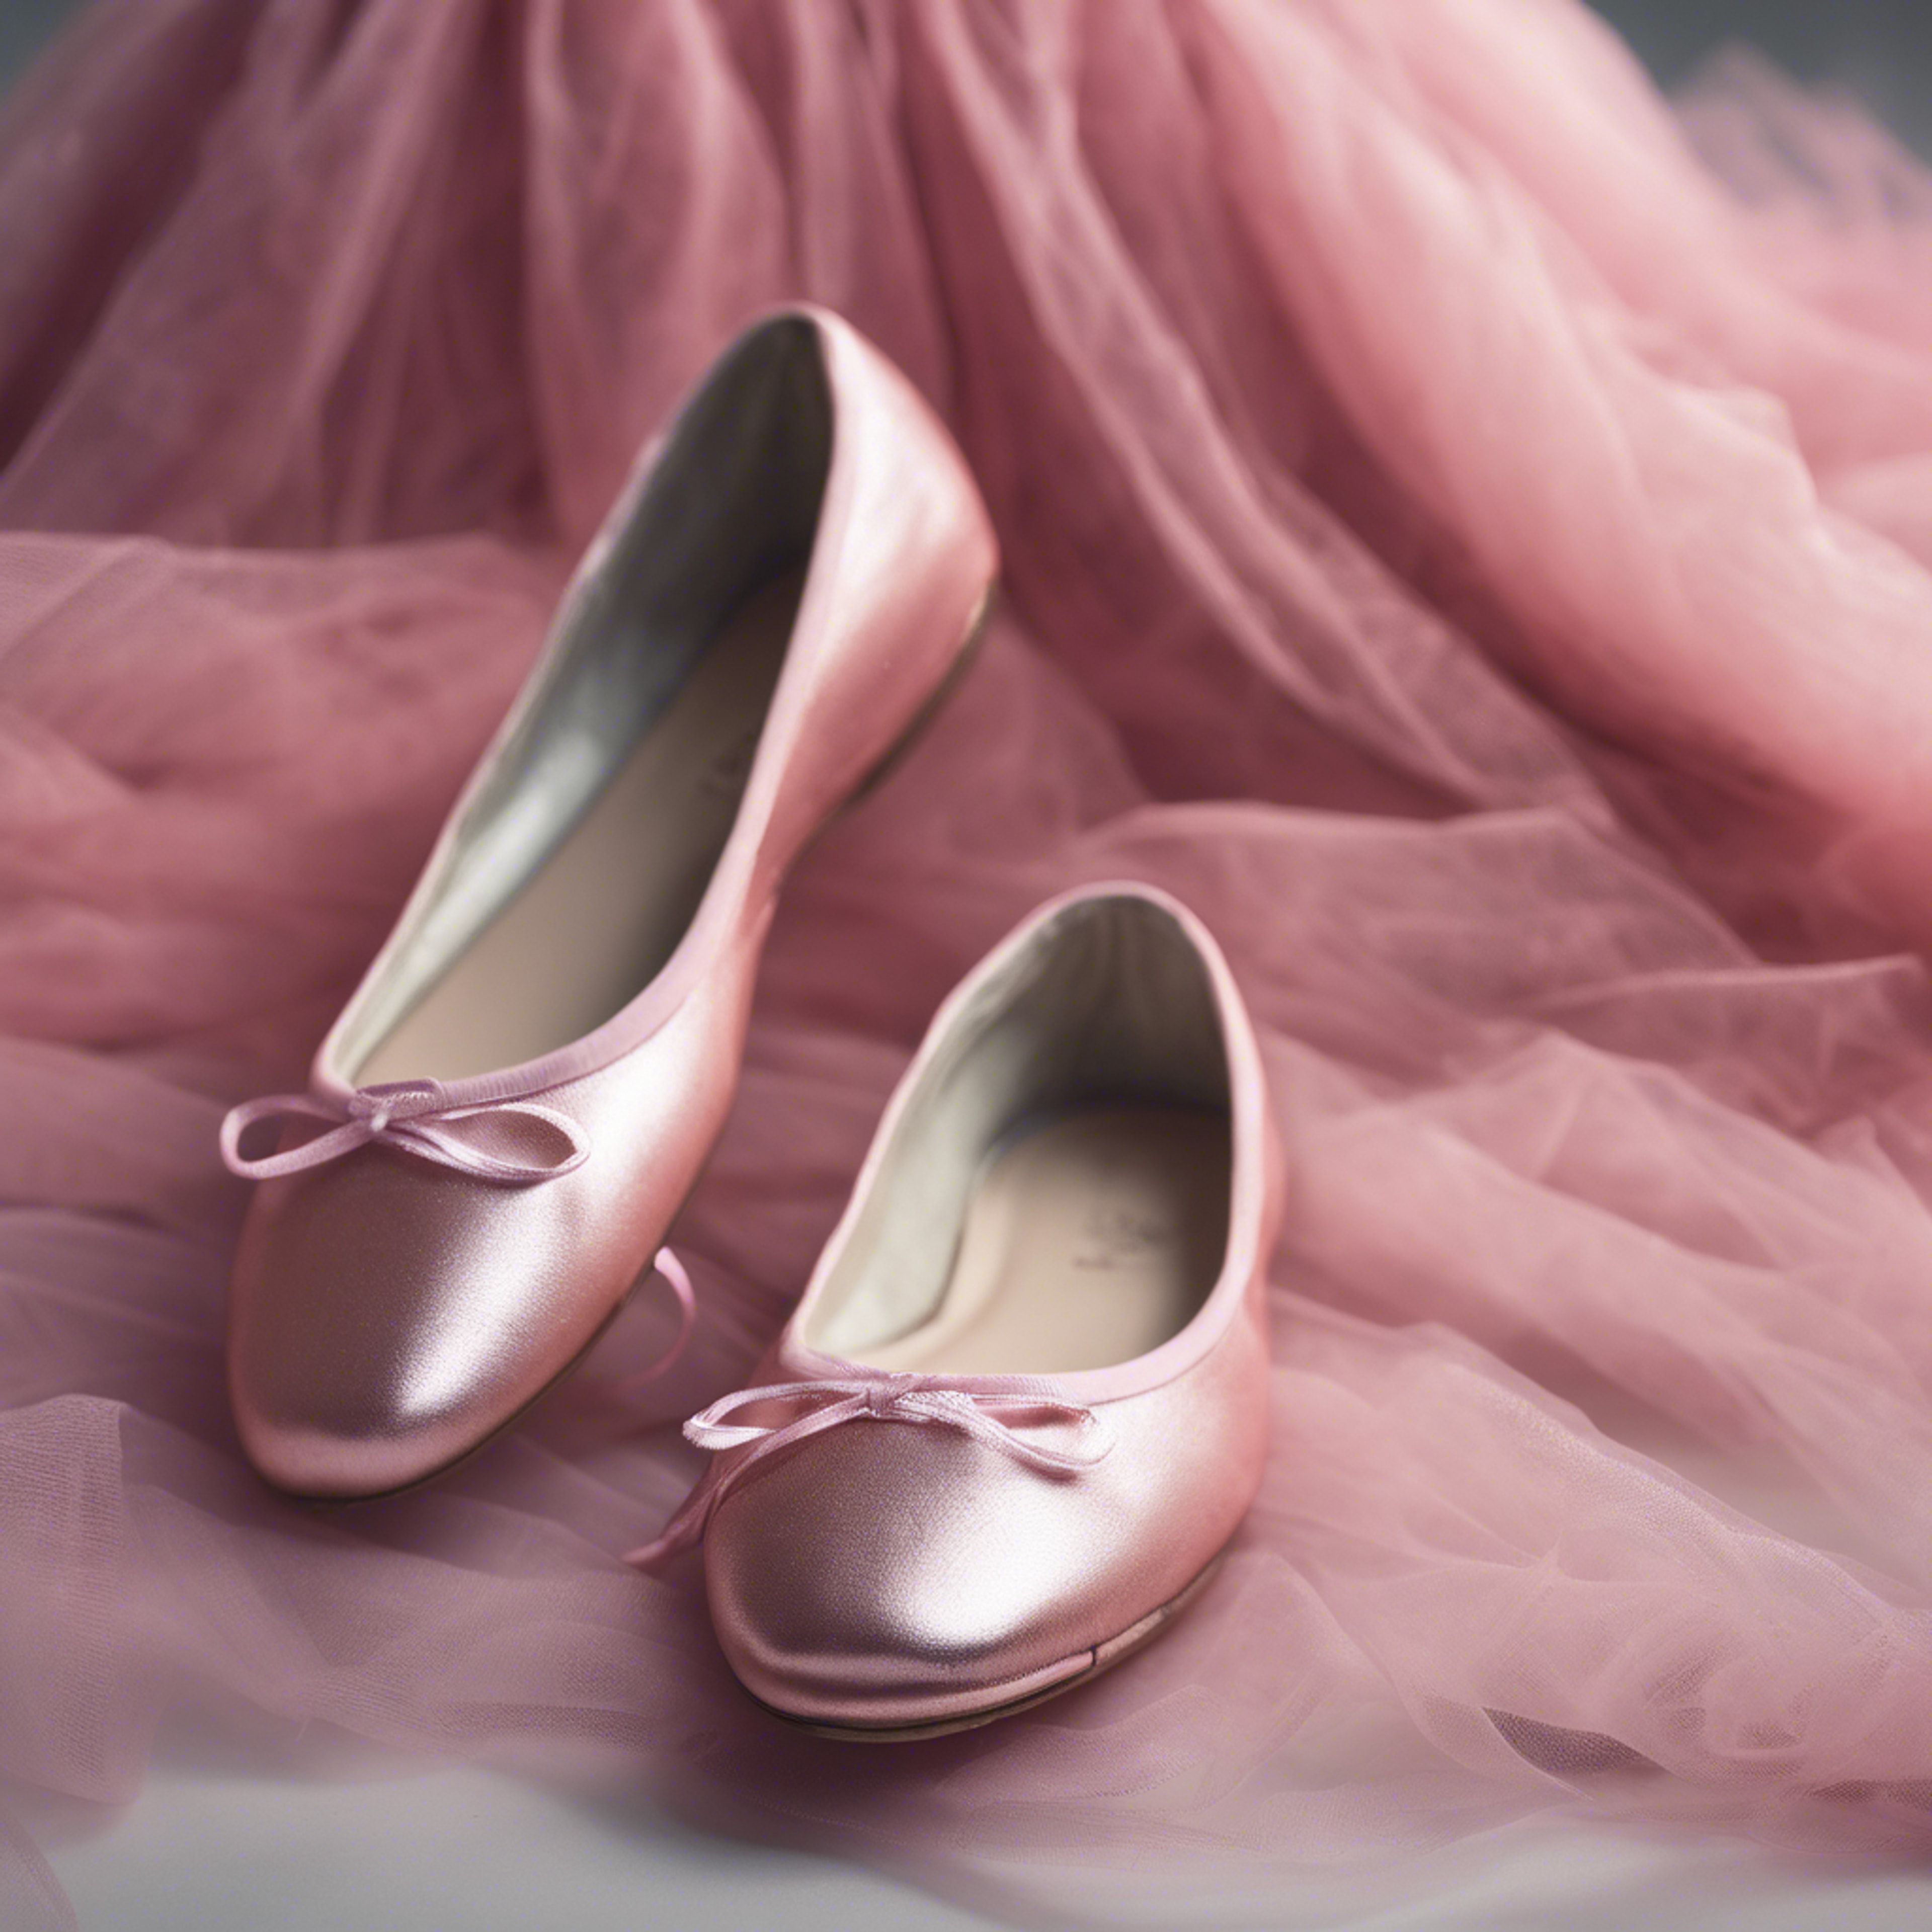 A pair of shiny ballet flats next to a pink tulle ballet skirt.壁紙[61612bb497ed40a6bca1]